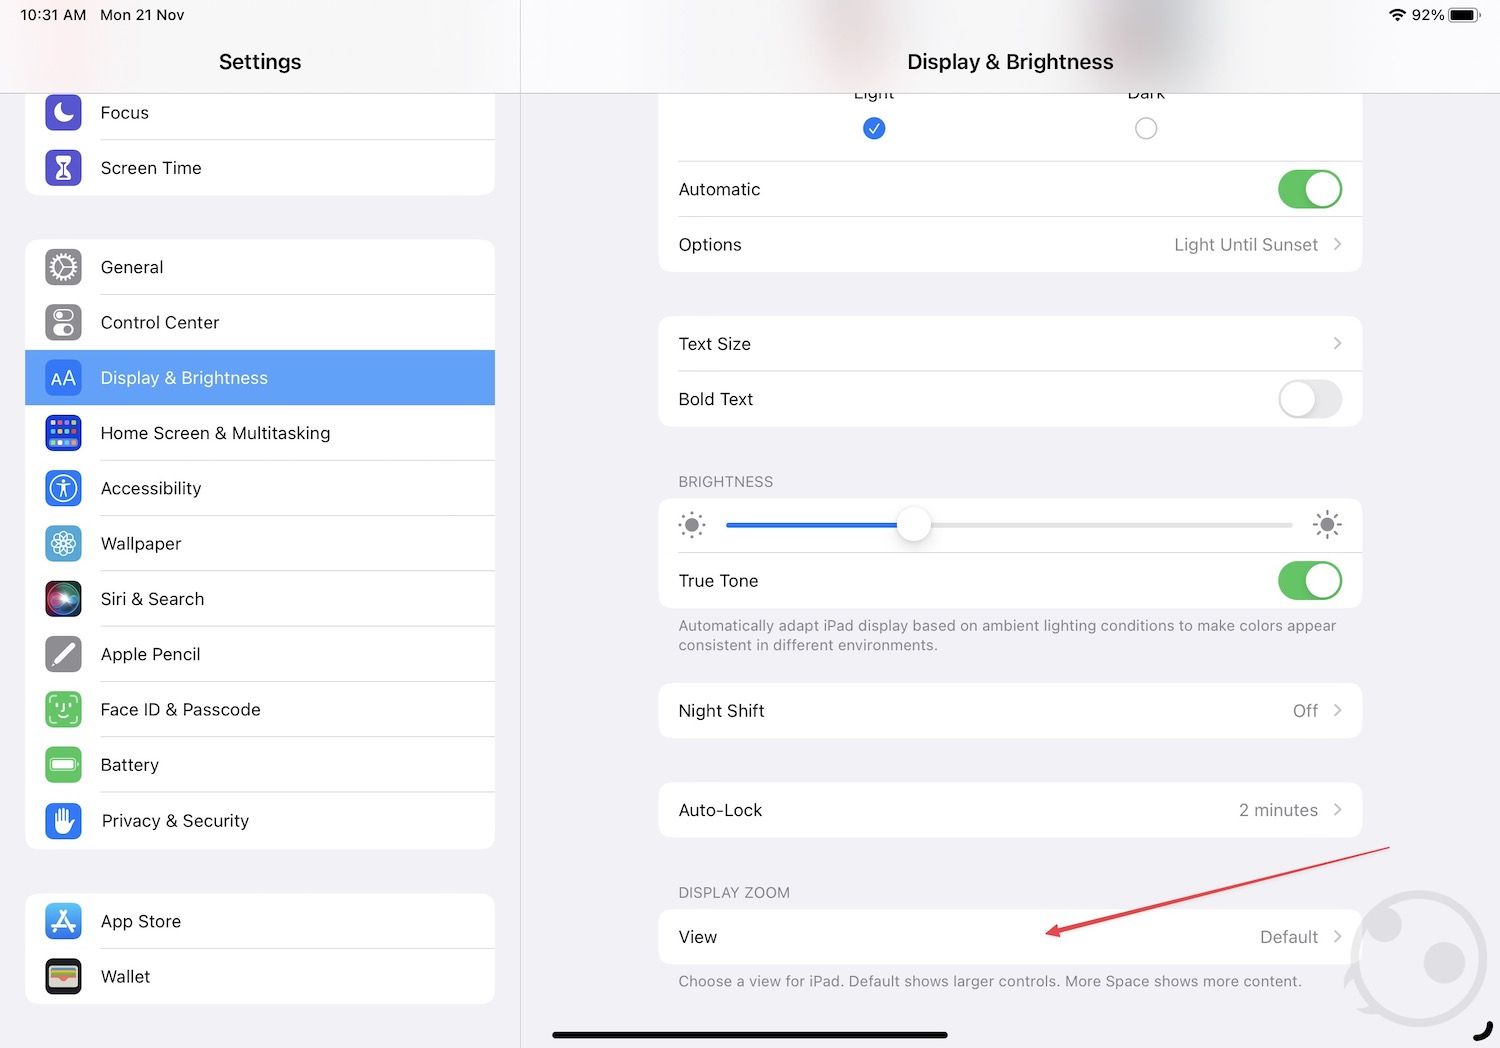 Get more display space on iPad Pro 2